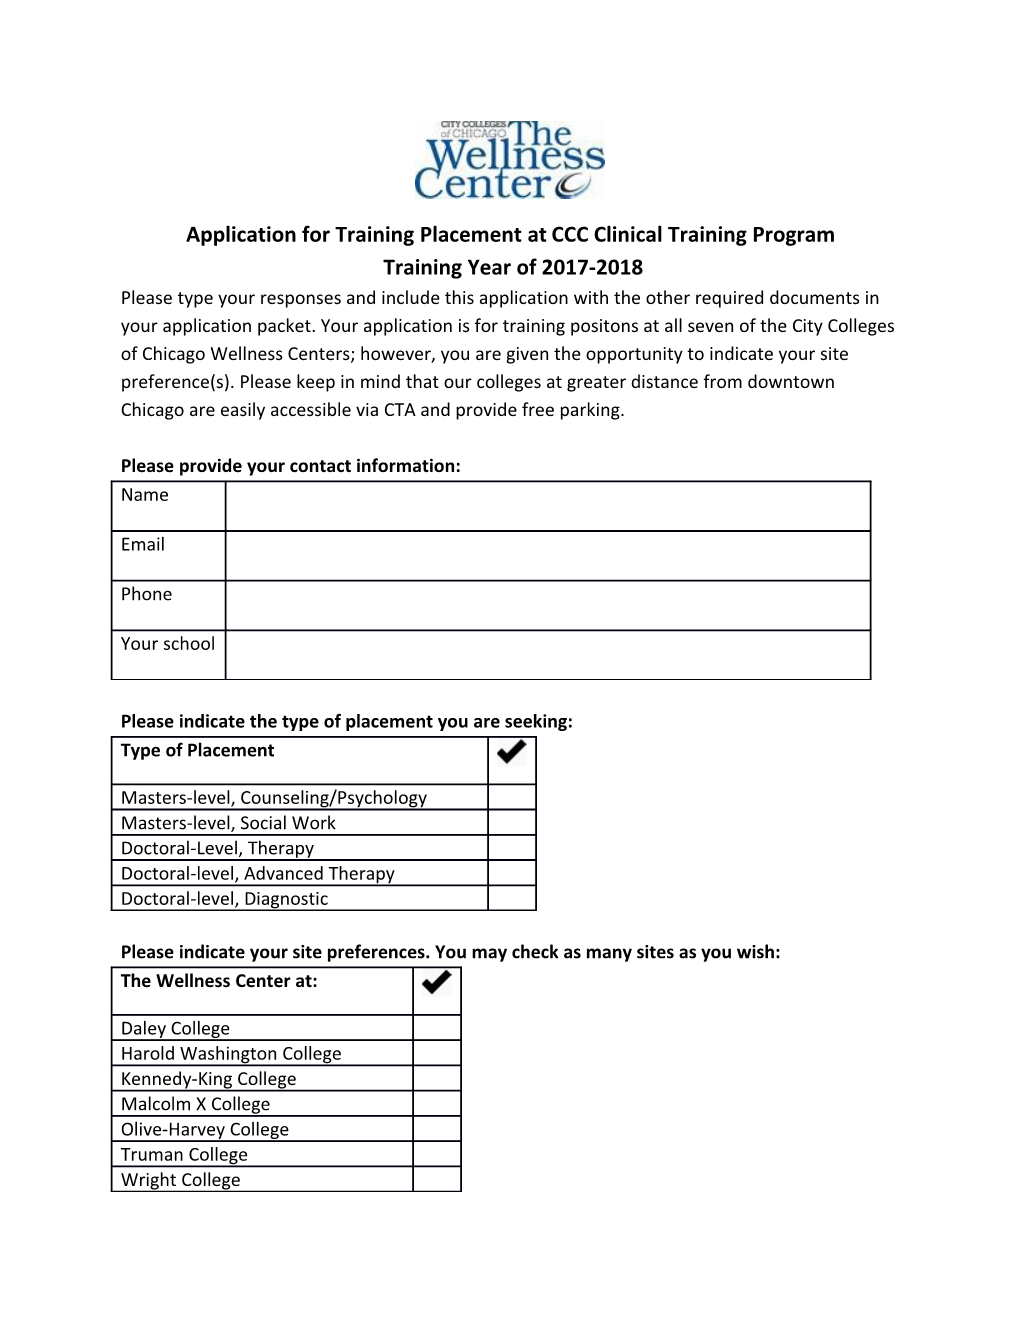 Application for Training Placement Atccc Clinical Training Program